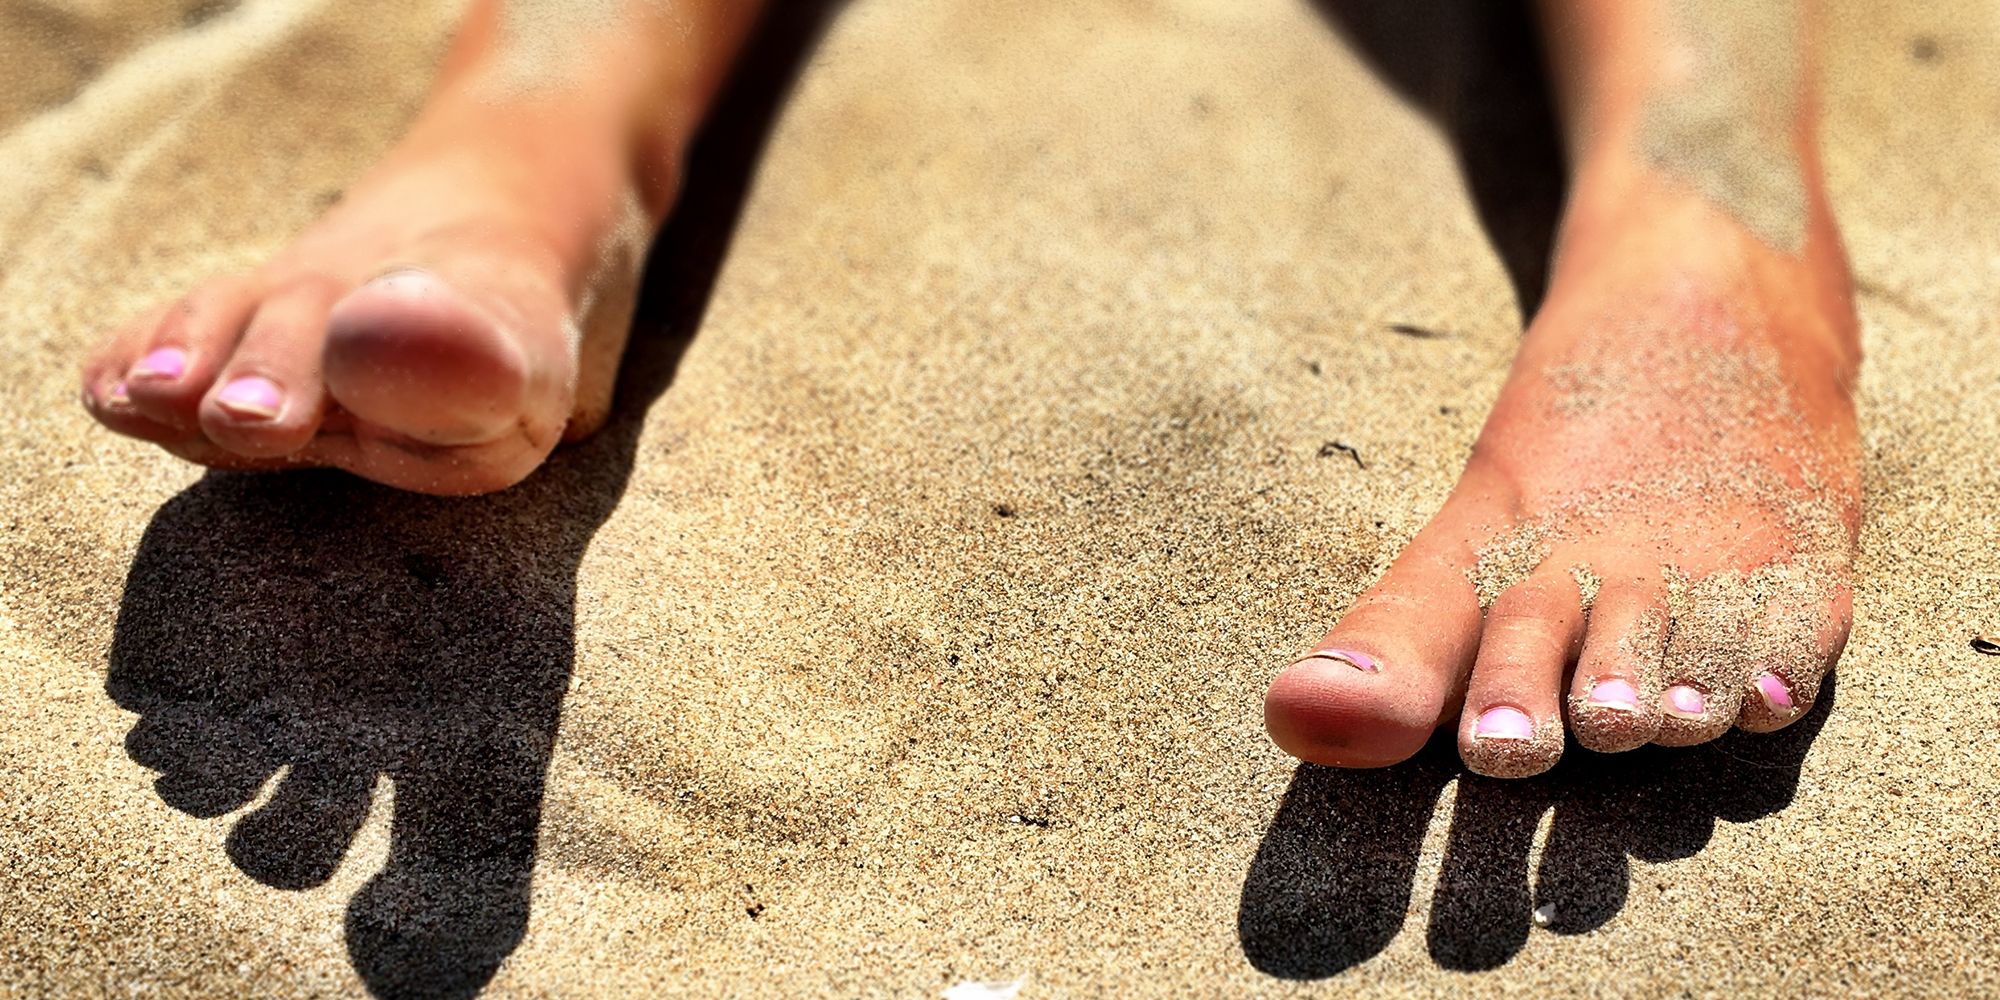 Here's Why You Shouldn't Run Barefoot On the Beach